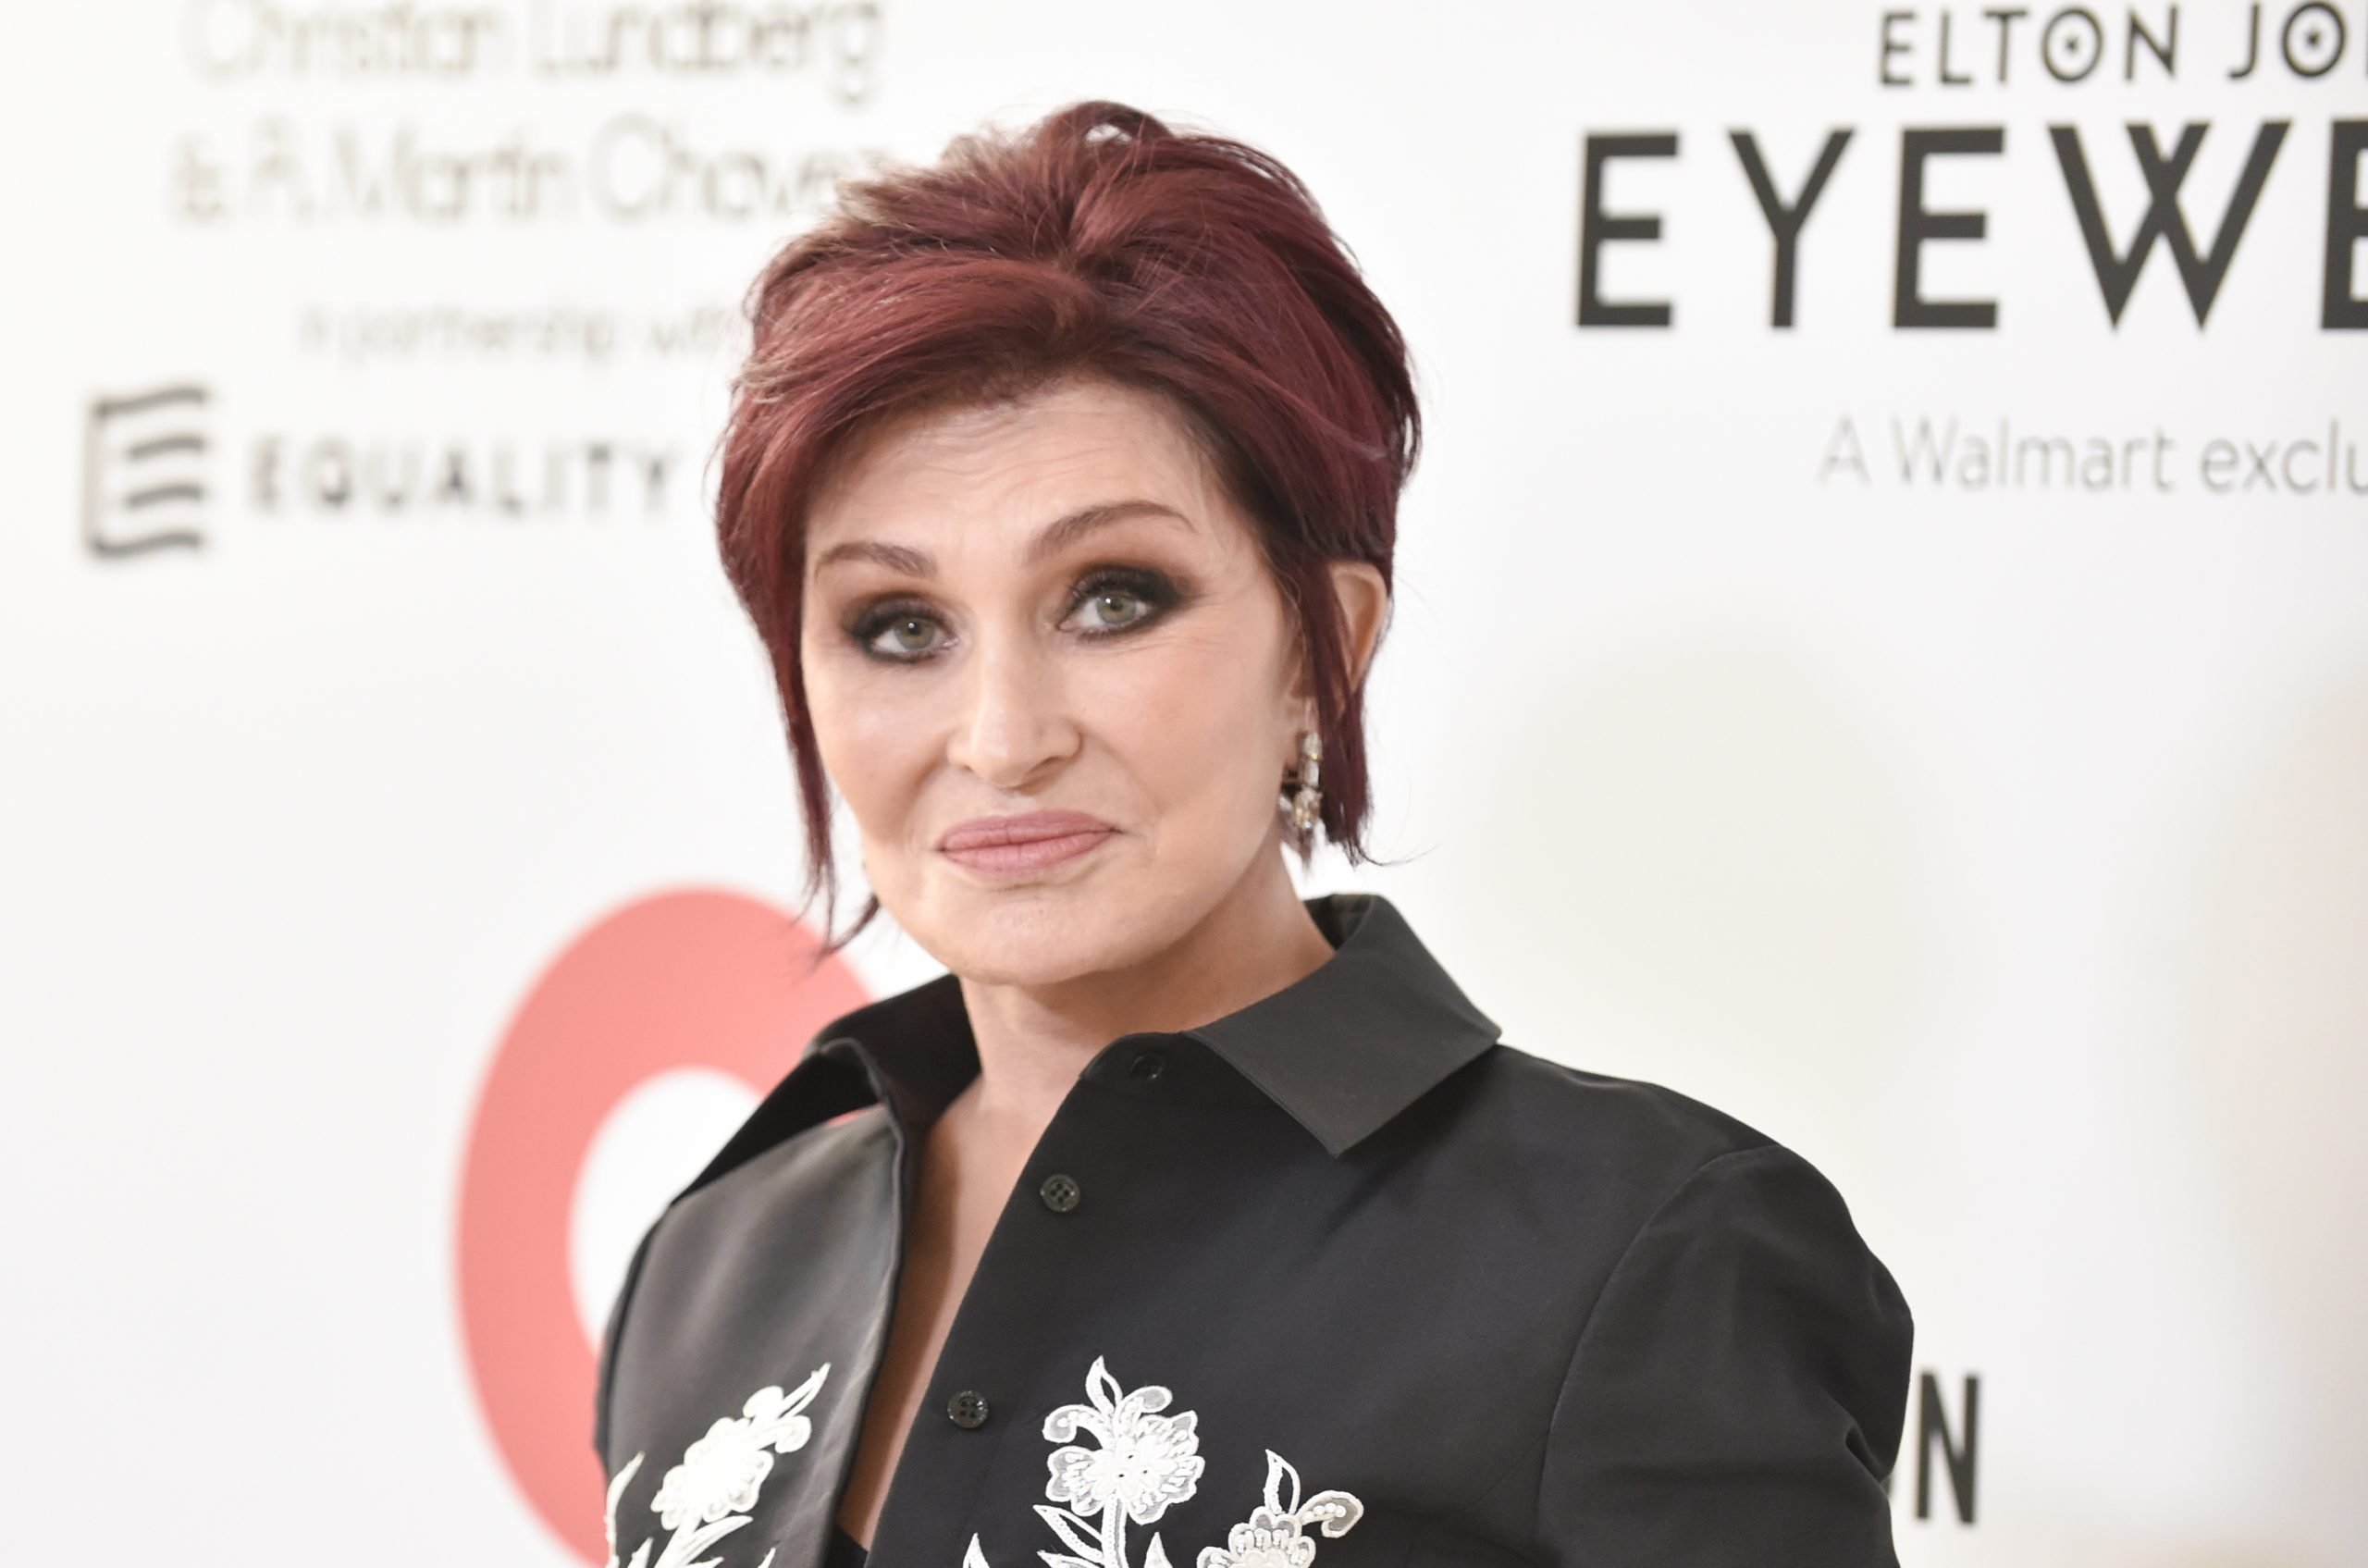 Sharon Osbourne Was Shocked by Her ‘Horrendous’ Facelift: ‘All I Need Is a Hunchback’